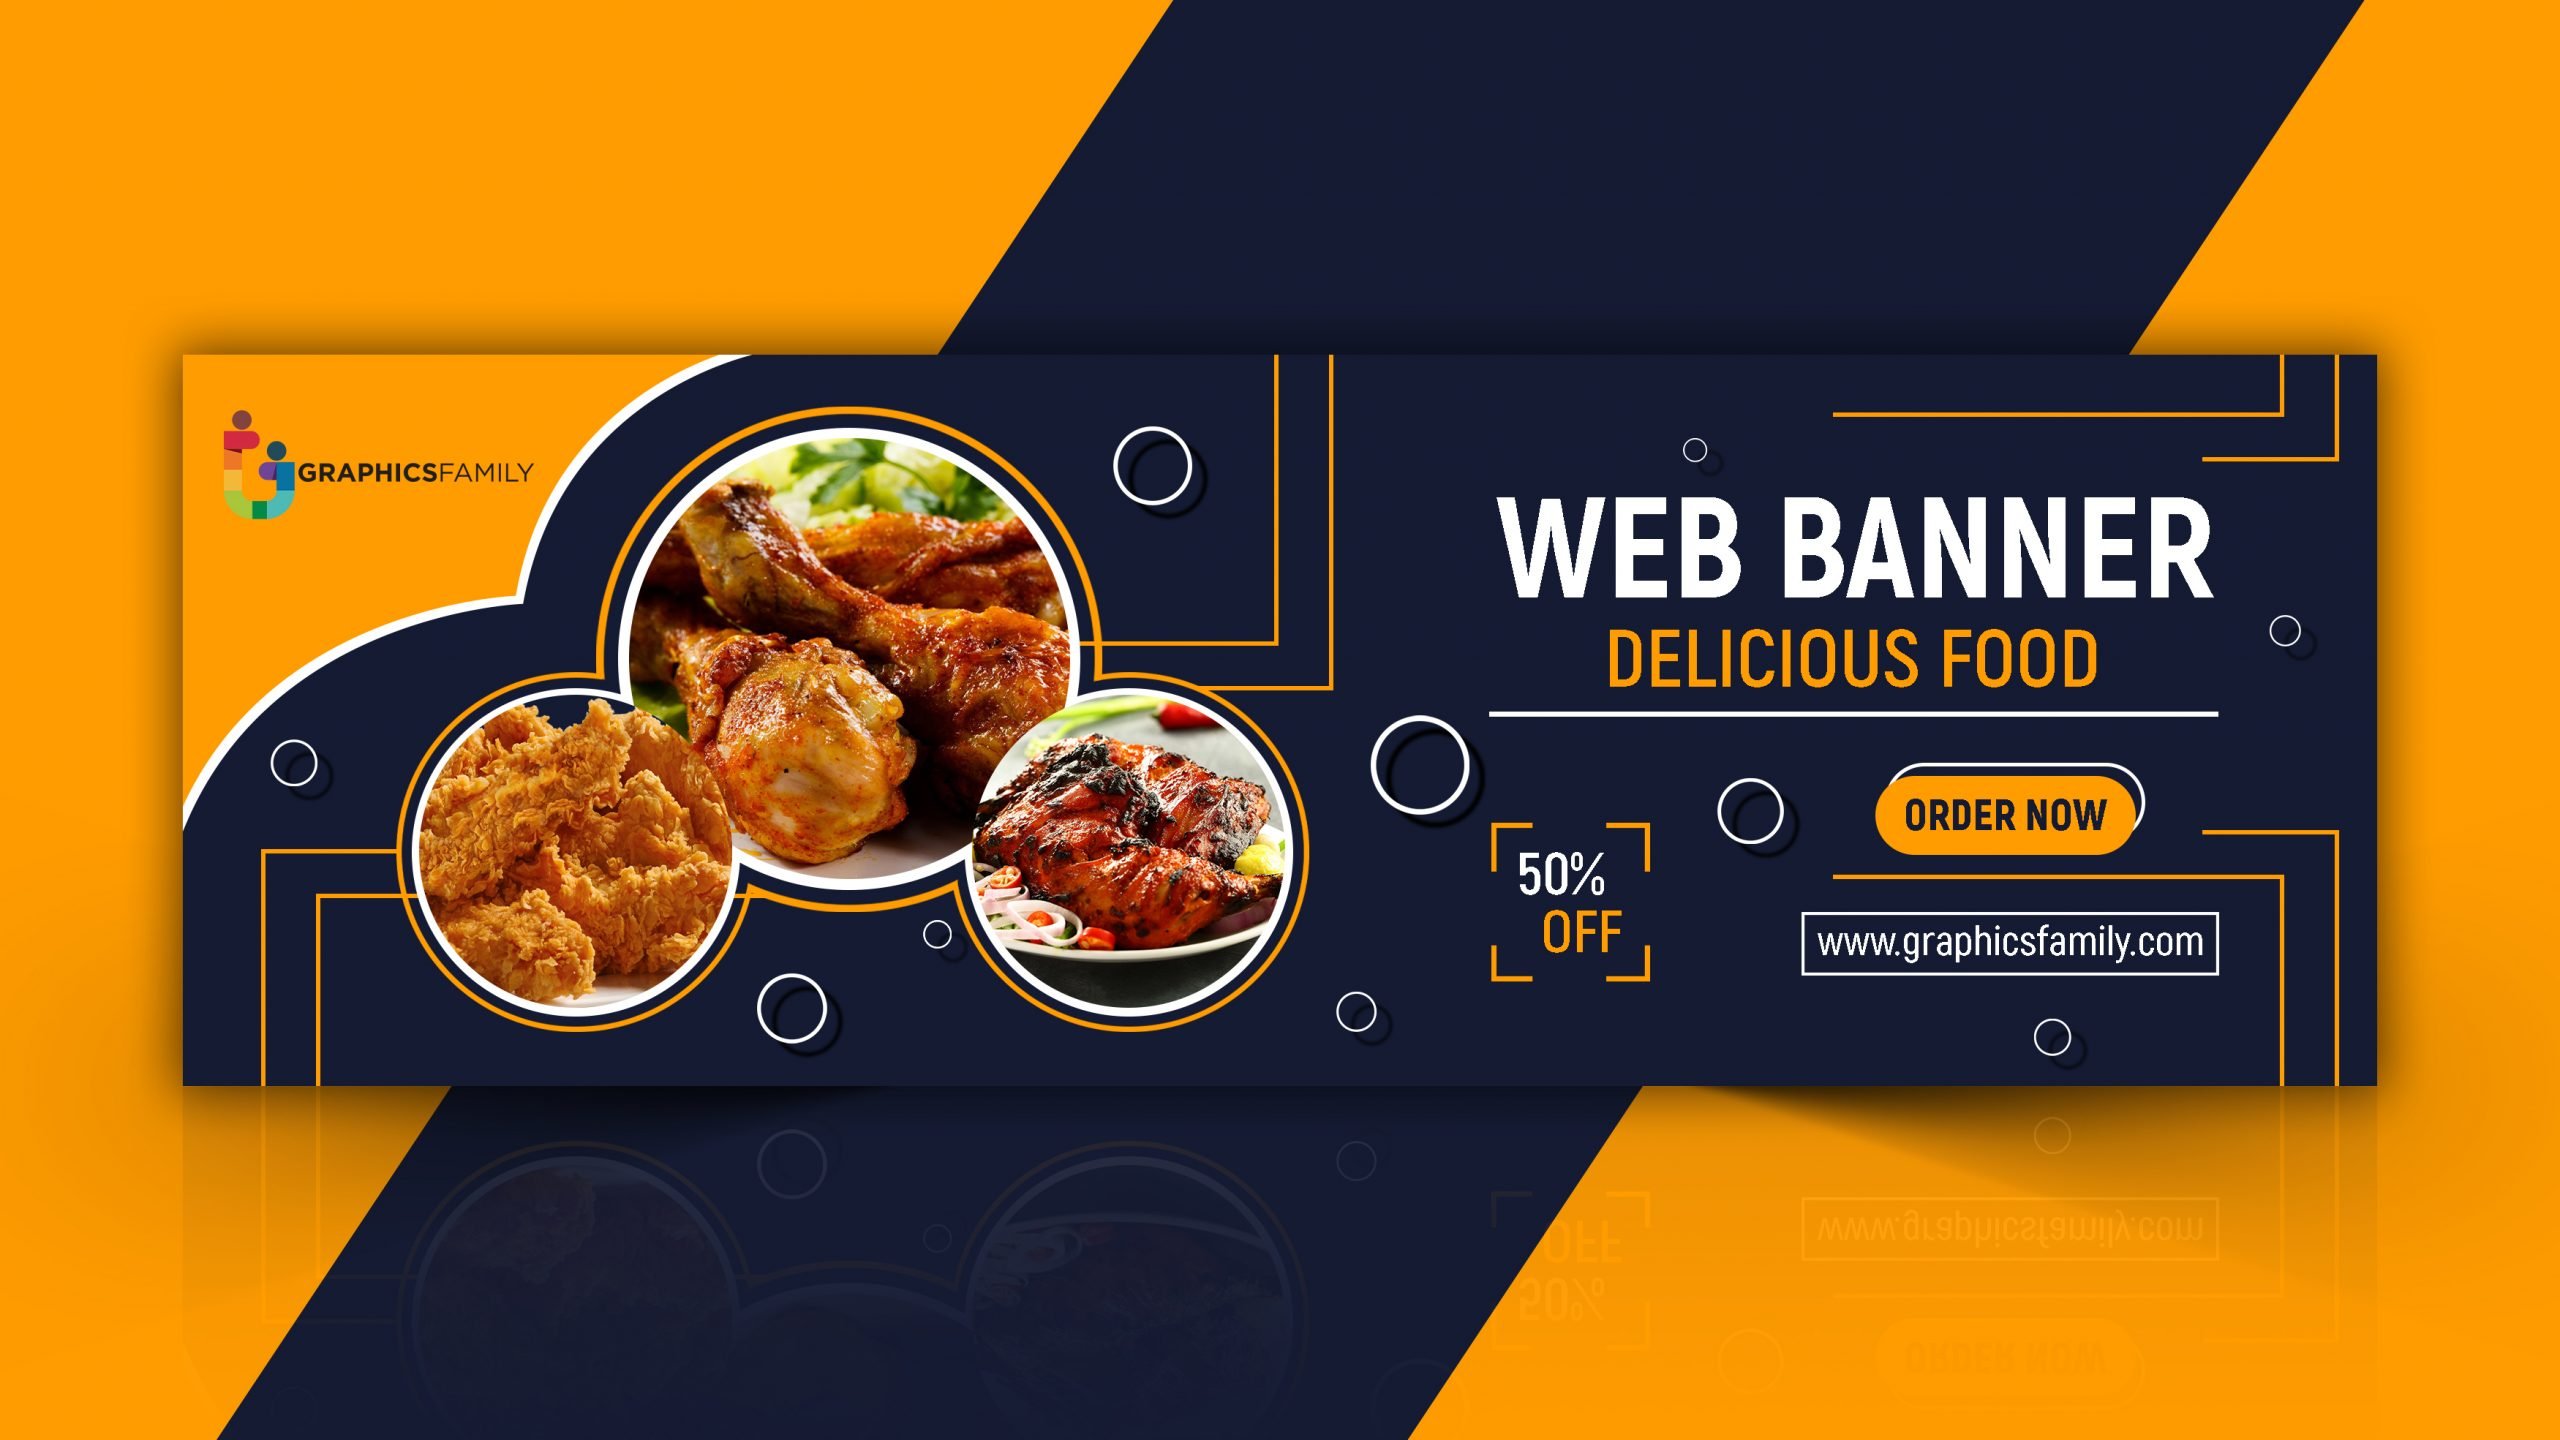 Tasty Food Web Banner Design GraphicsFamily